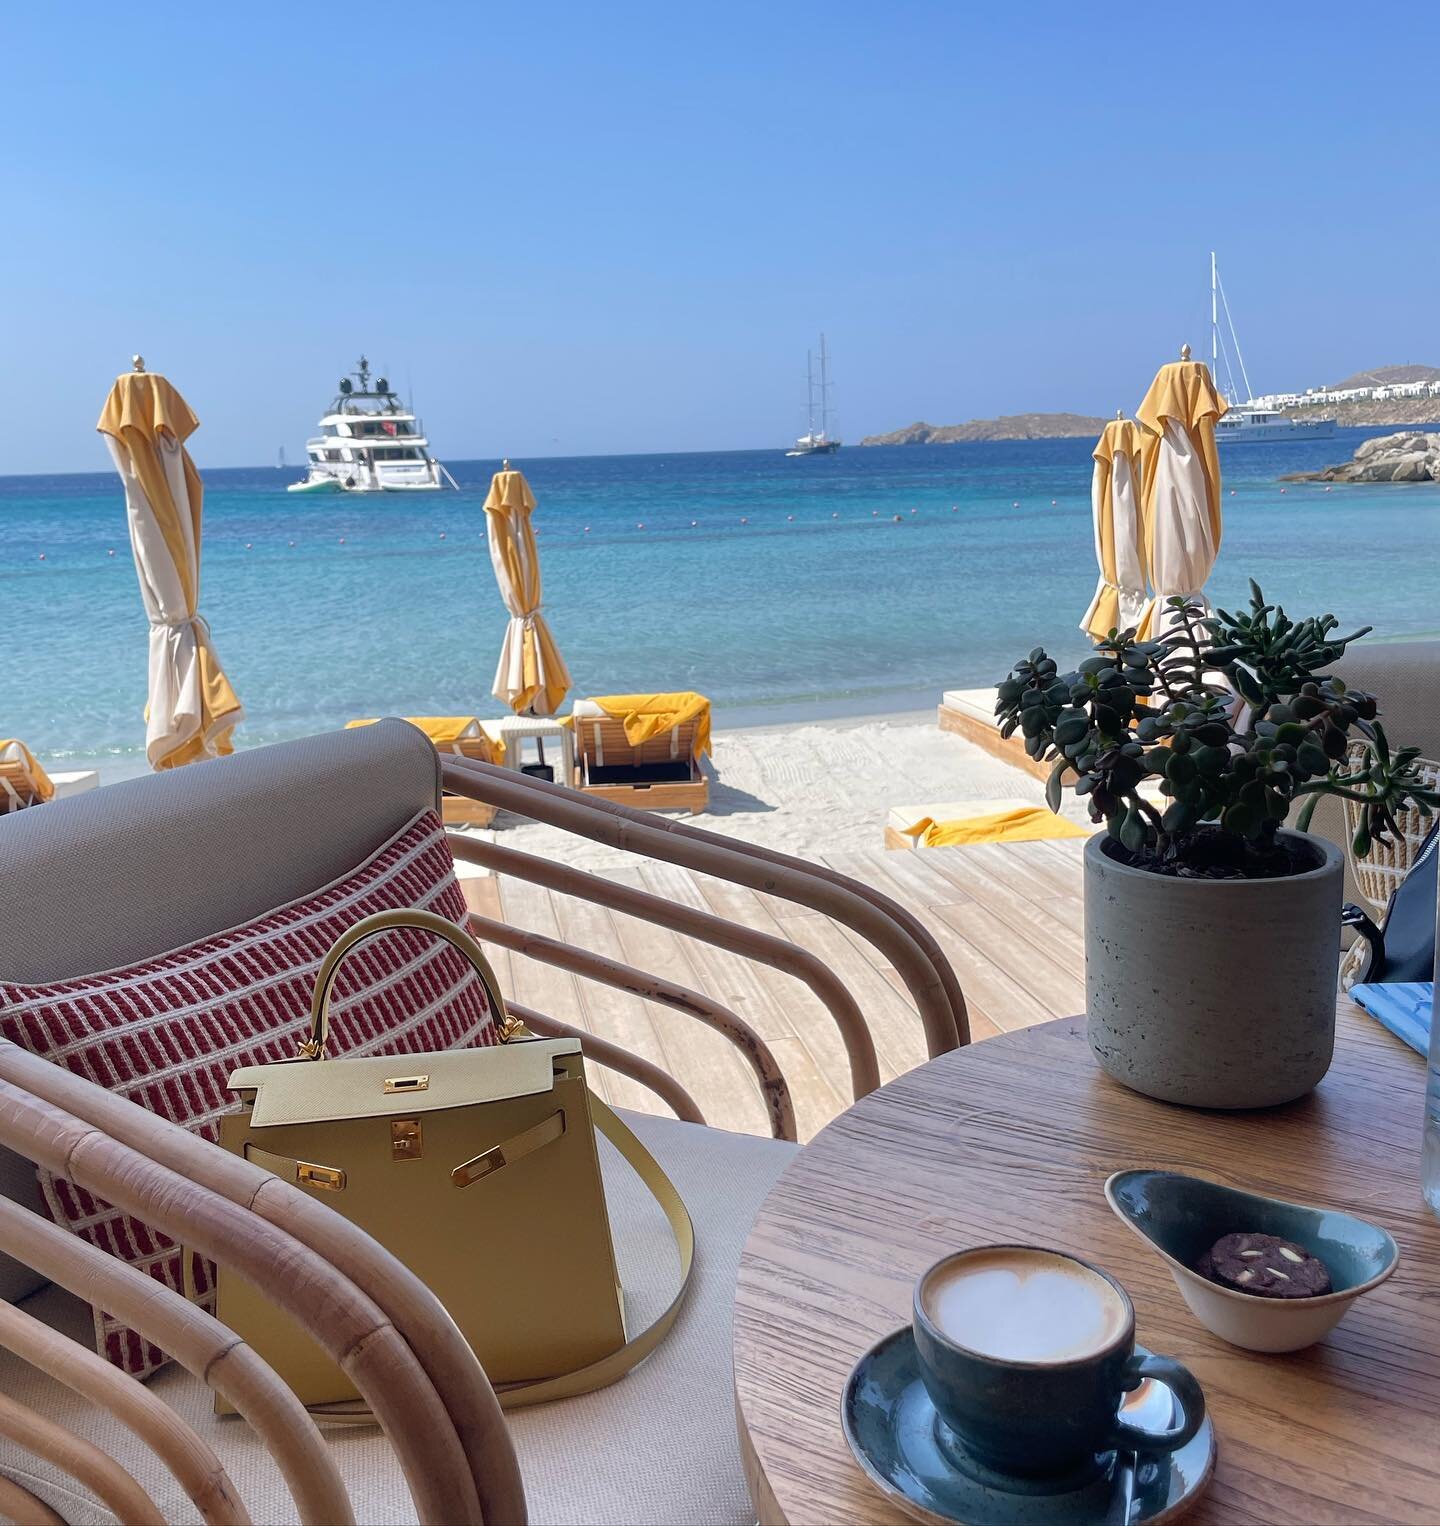 Step into the world of luxury &amp; serenity @santamarinamykonos #mykonos #santamarinamykonos #theluxurycollection #marriott